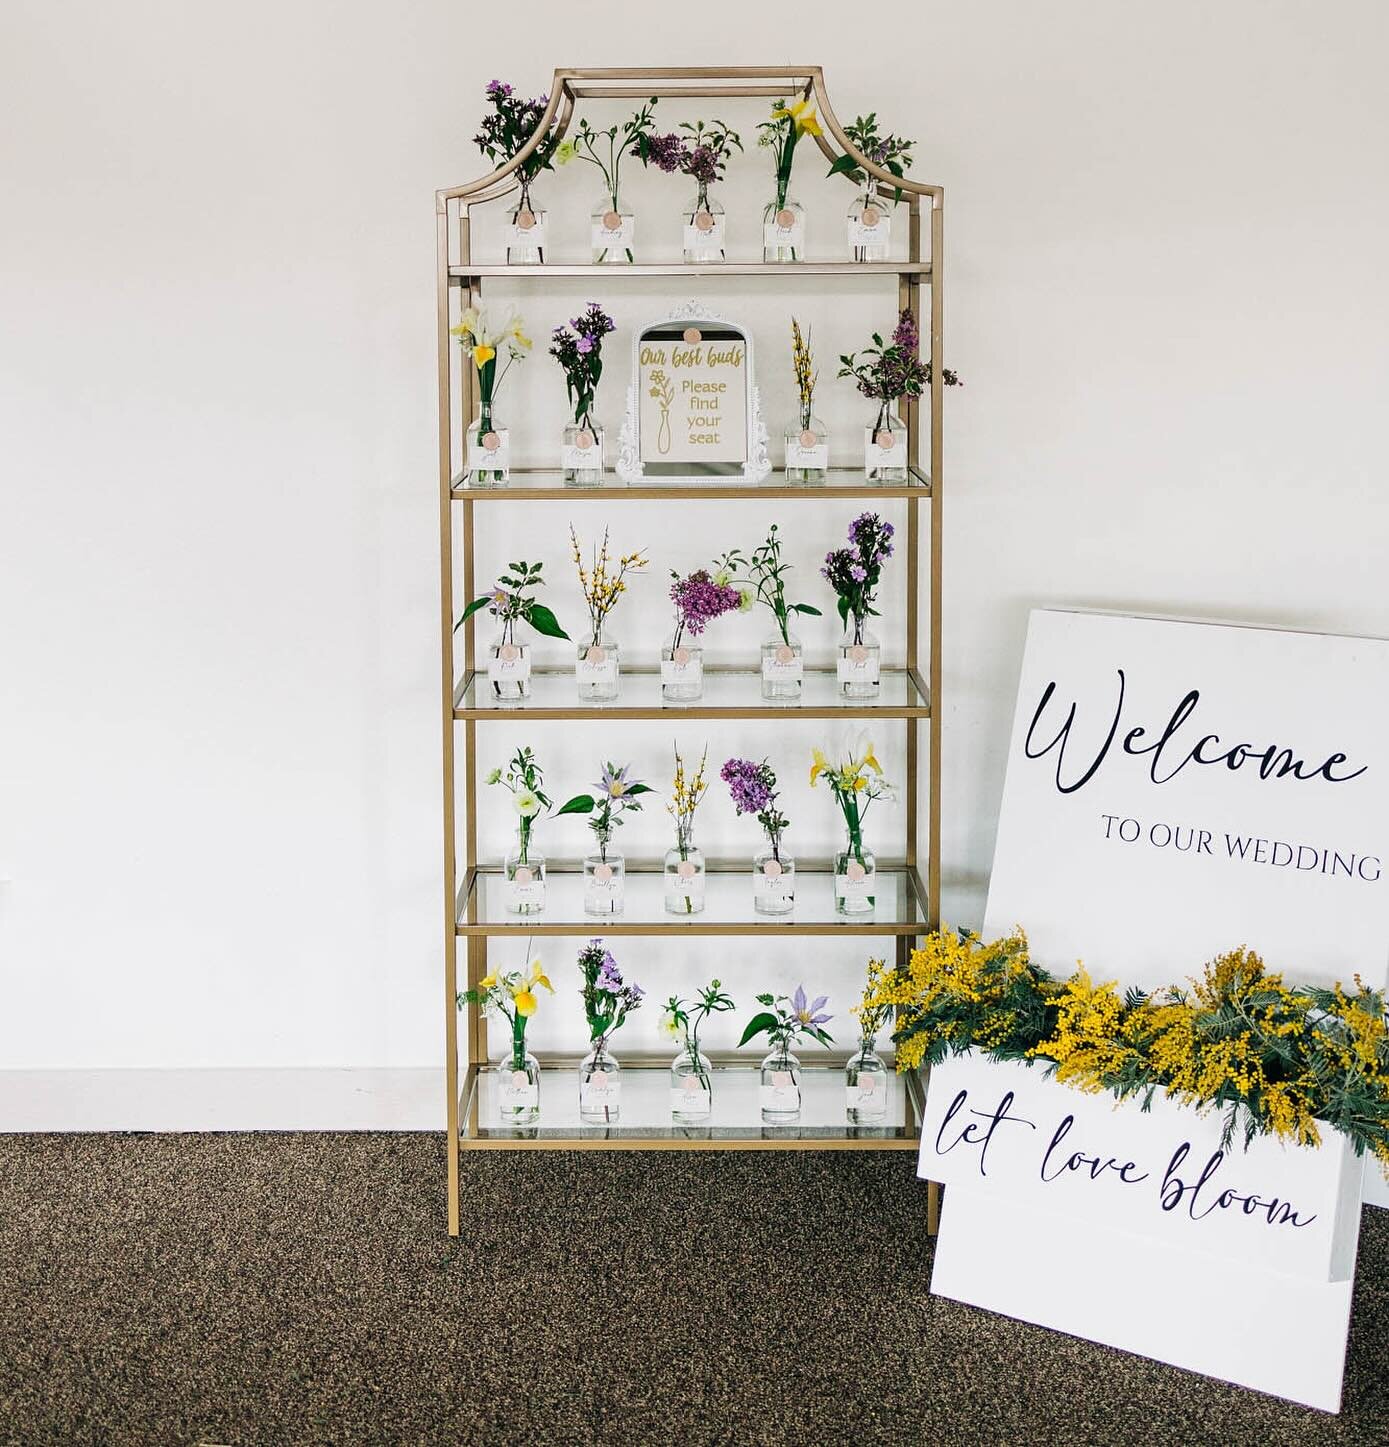 💛 Let love bloom 💛
Best bud walls may be my favorite trend of 2024 so far, what about you? 
Vendor Team 
@brick_and_willow_photography 
@arrowheadcoloradoevents 
@jlcweddingsandevents 
@daintydetailscolorado 
@gingerly_baked 
@cydneystaplesartistry